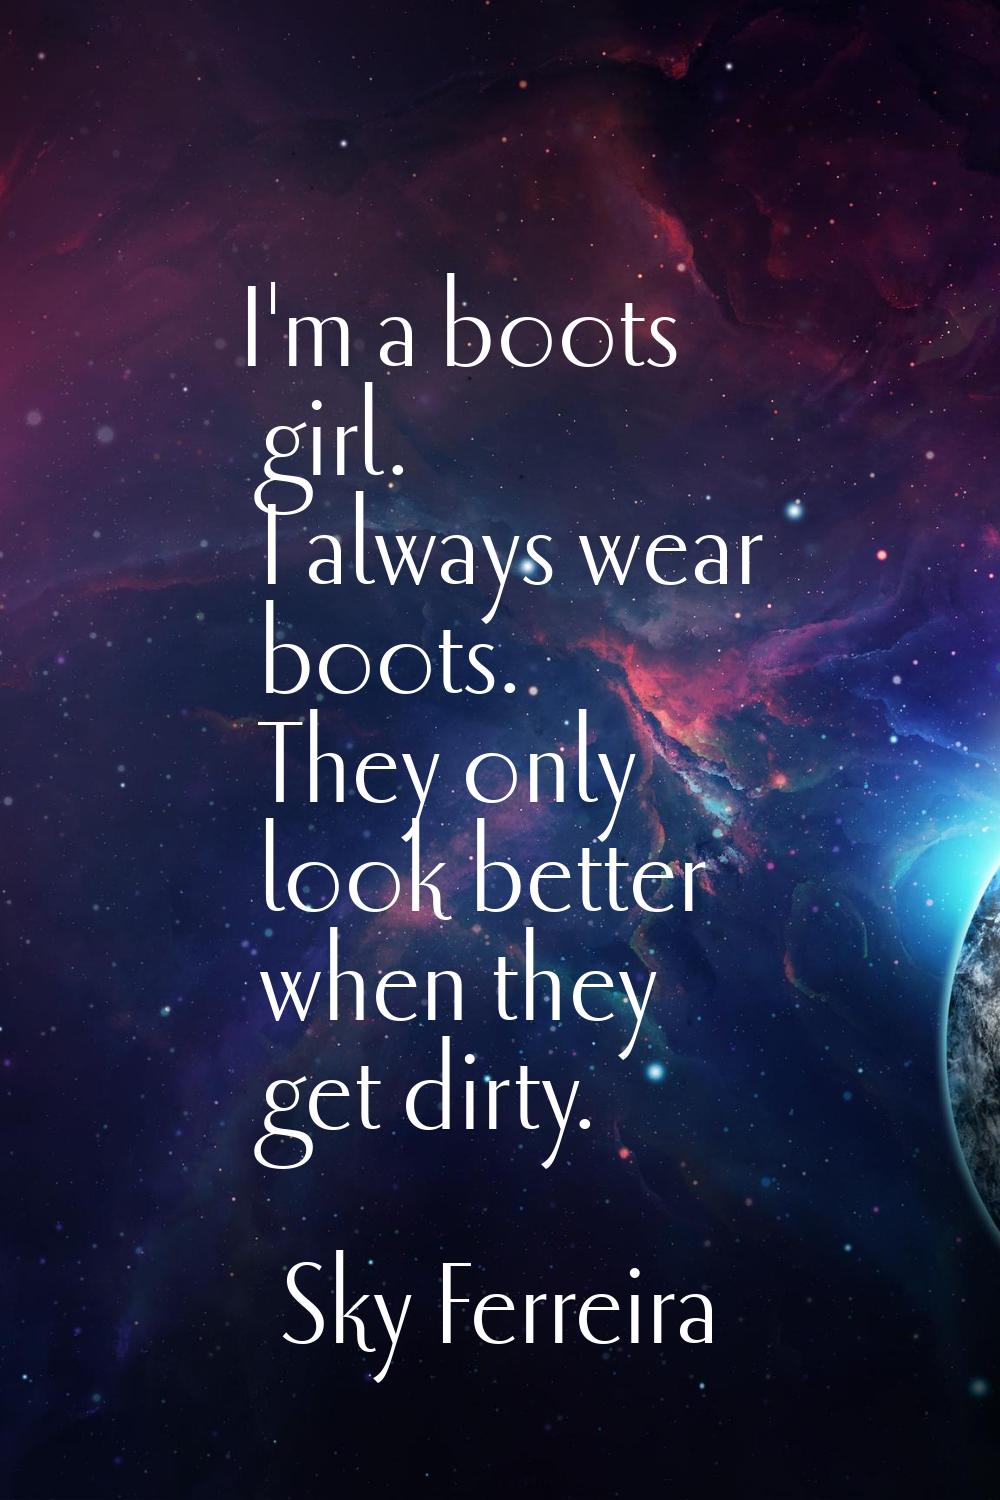 I'm a boots girl. I always wear boots. They only look better when they get dirty.